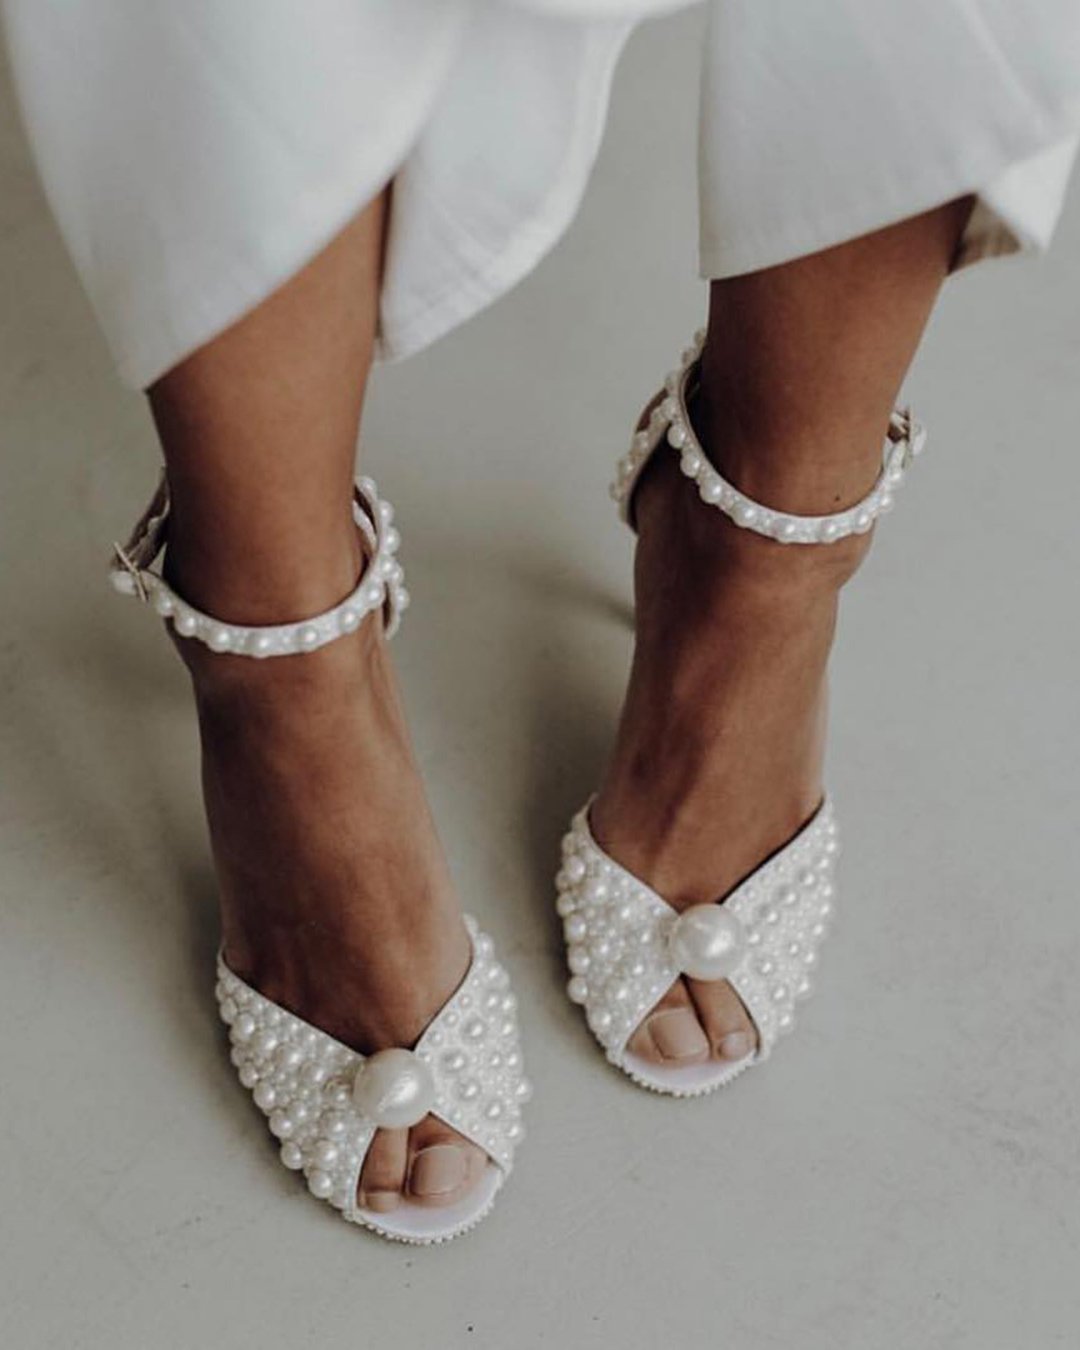 beach wedding shoes white with heels and pearls ivory jimmychoo